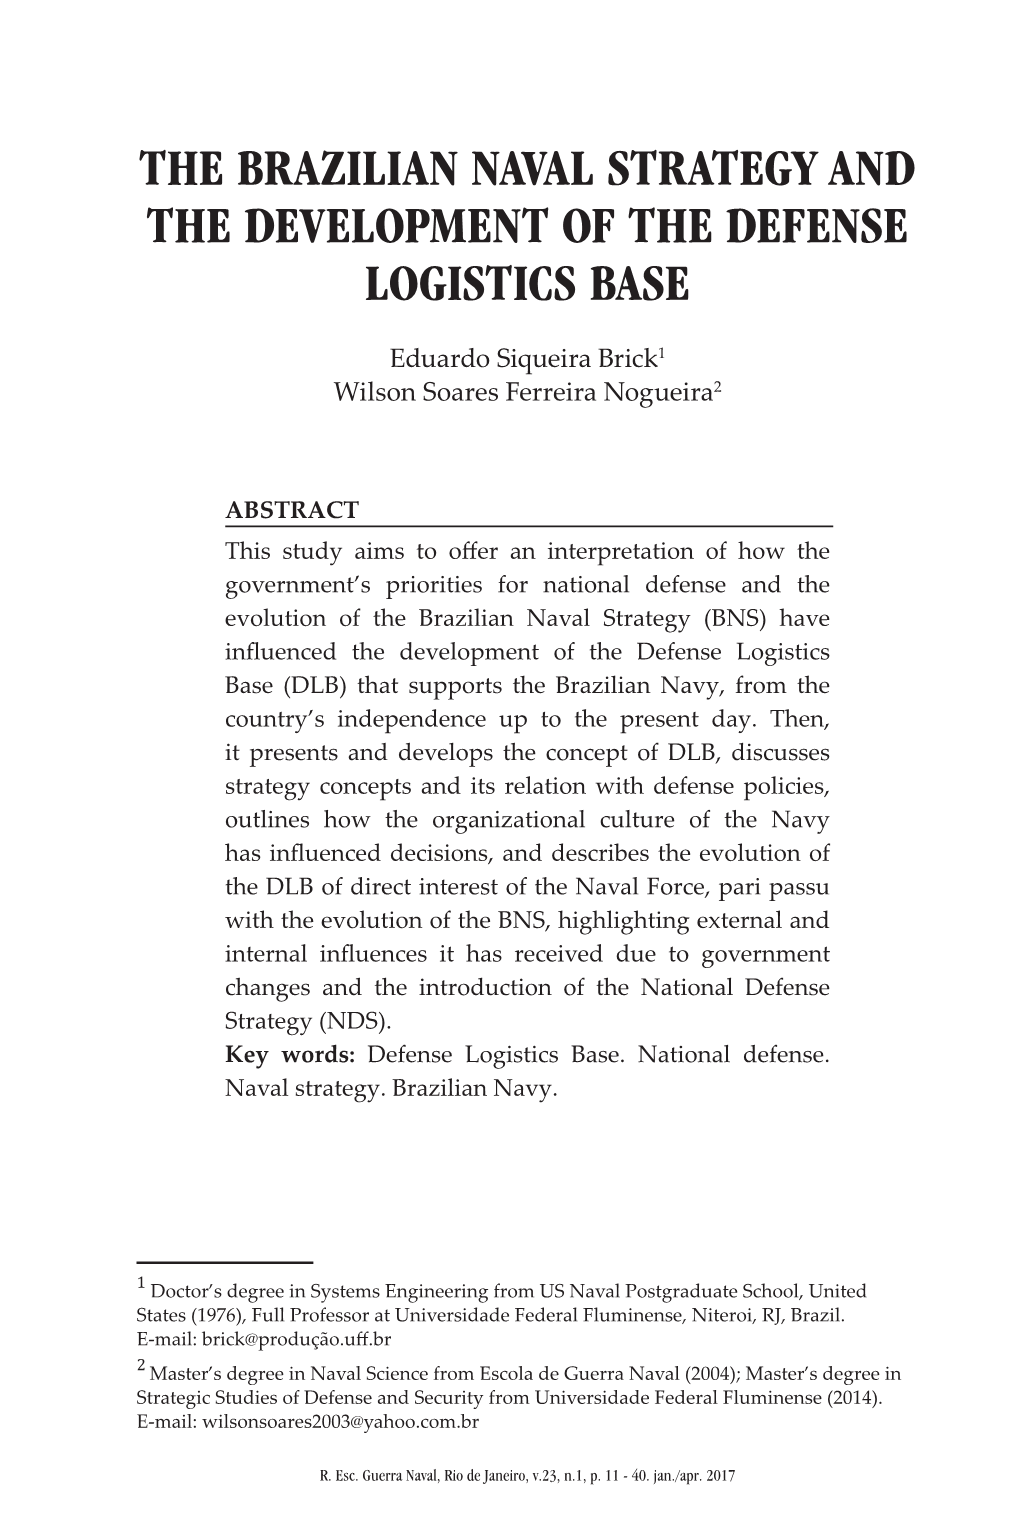 The Brazilian Naval Strategy and the Development of the Defense Logistics Base